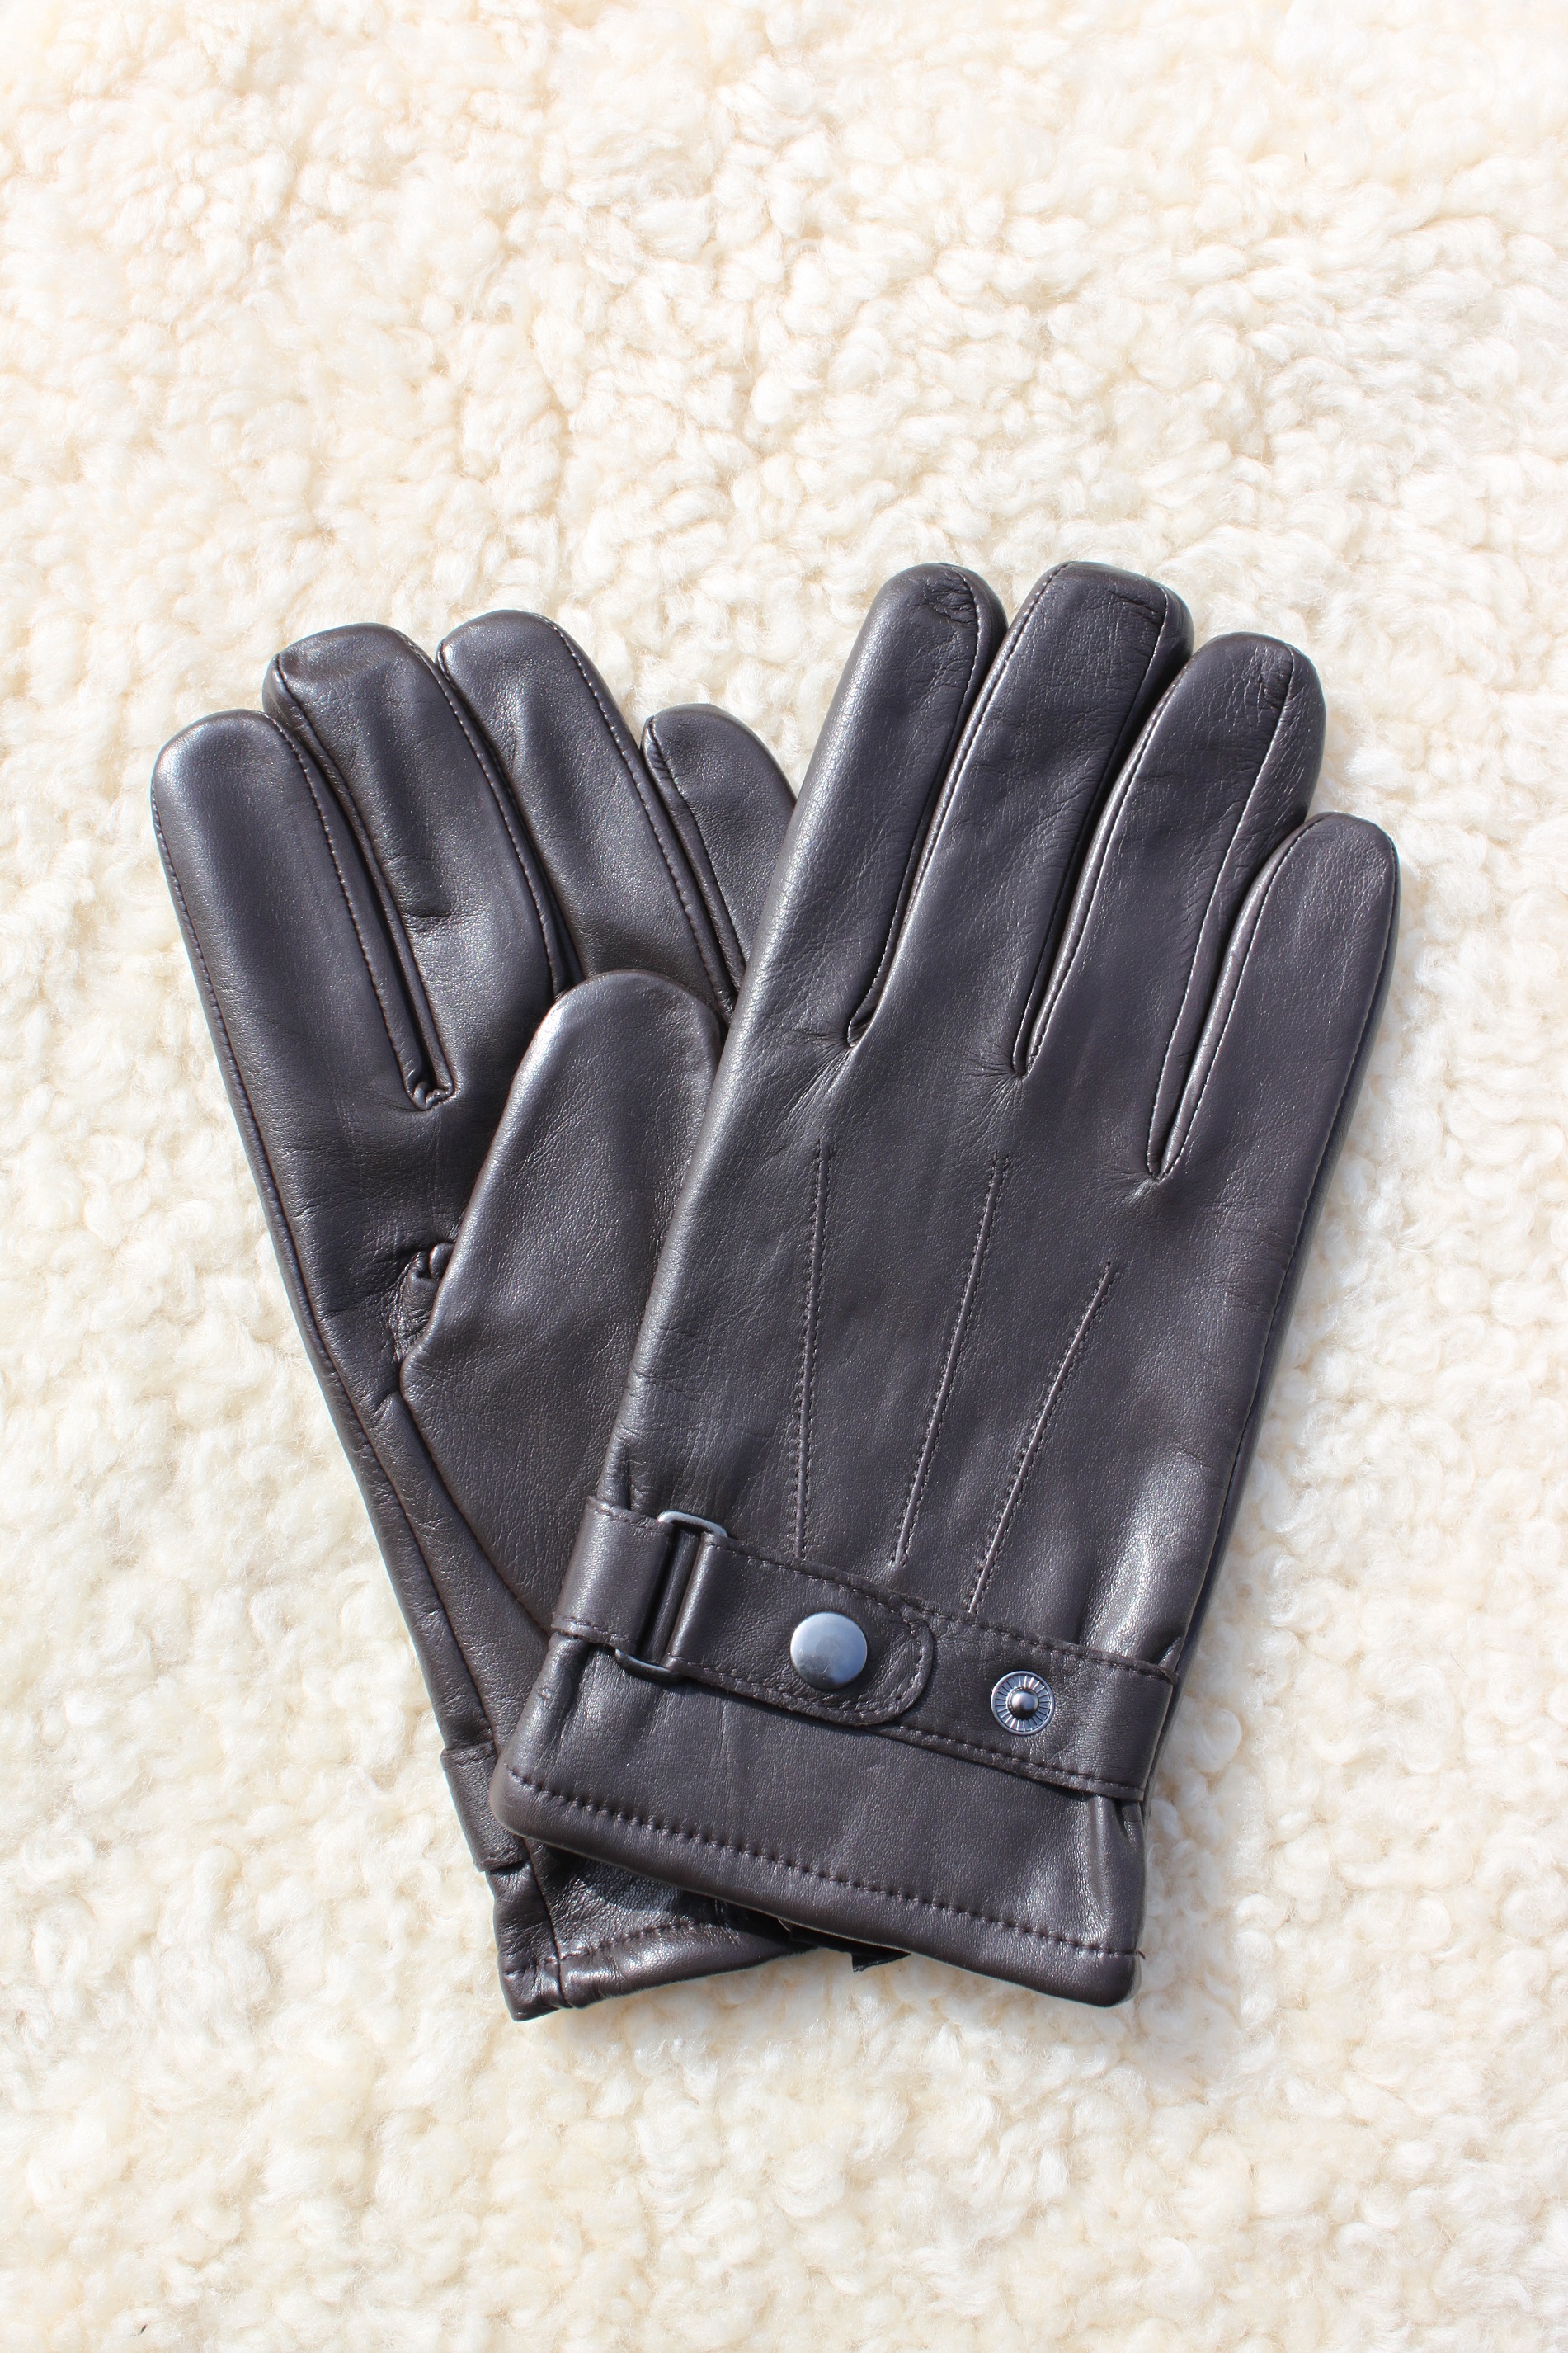 Men's Leather Gloves in Brown and Black by Radford Leathers